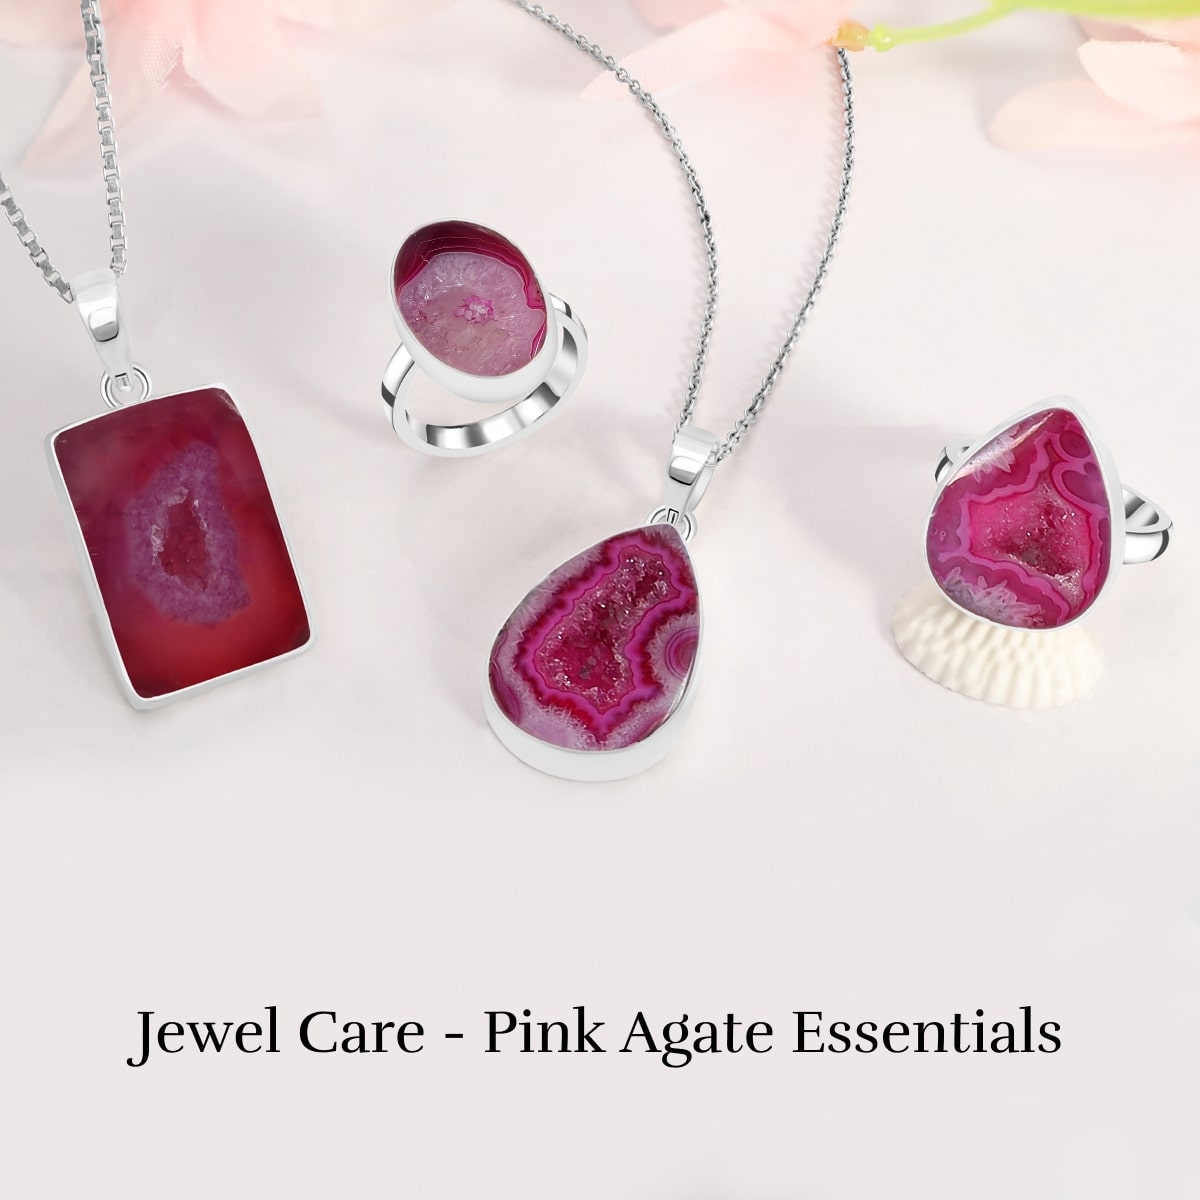 How to Care for Your Pink Agate Jewelry?